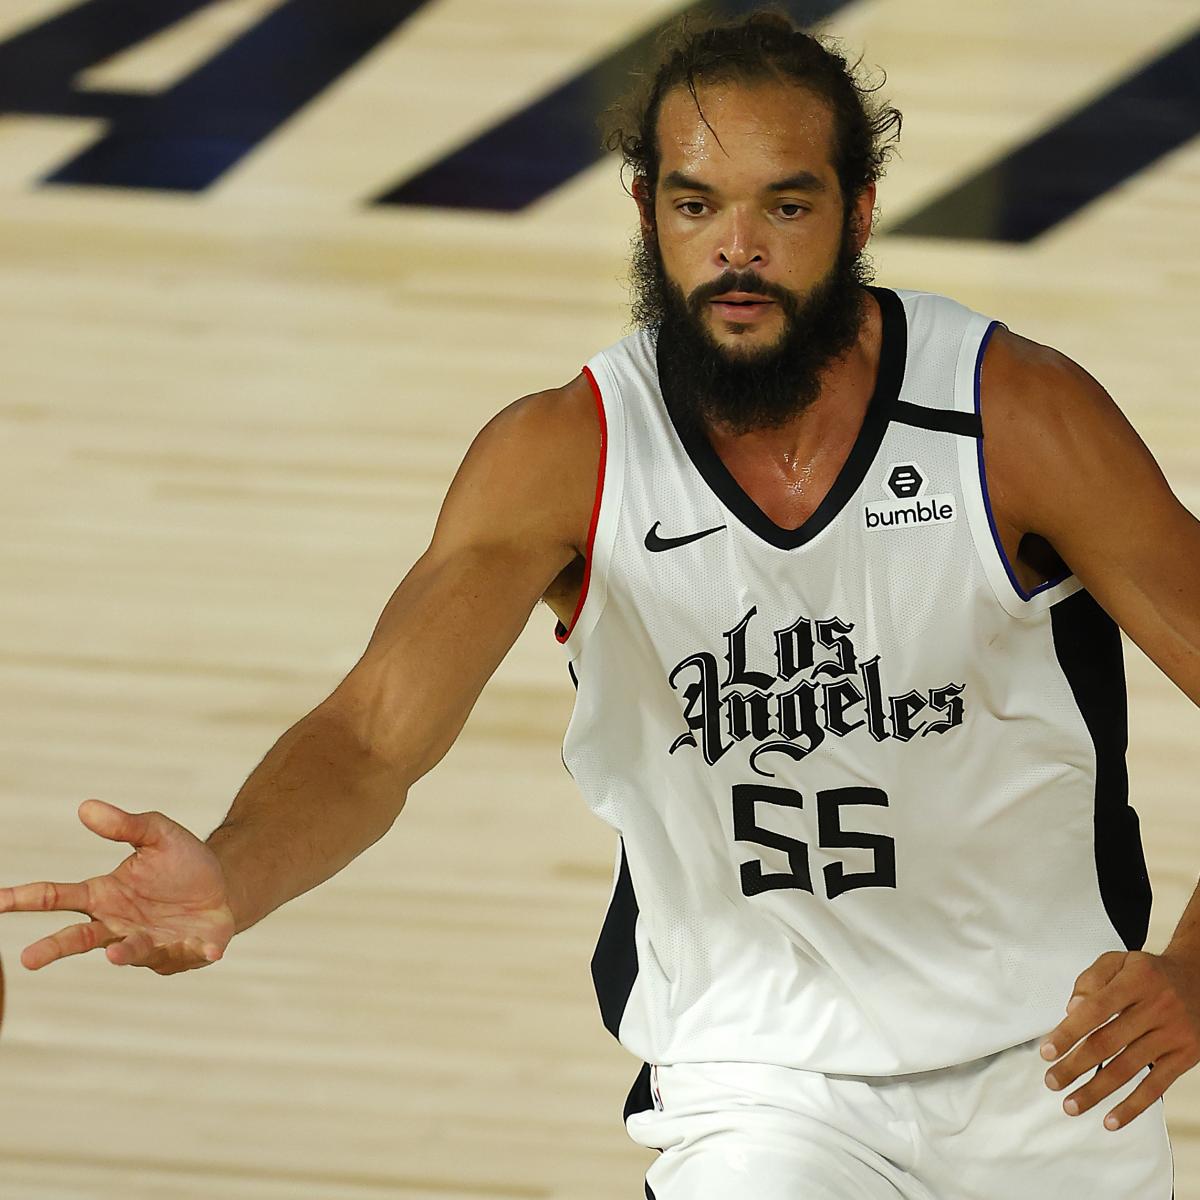 Joakim Noah ‘Likely Headed In direction of Retirement’ After Being Waived by Clippers